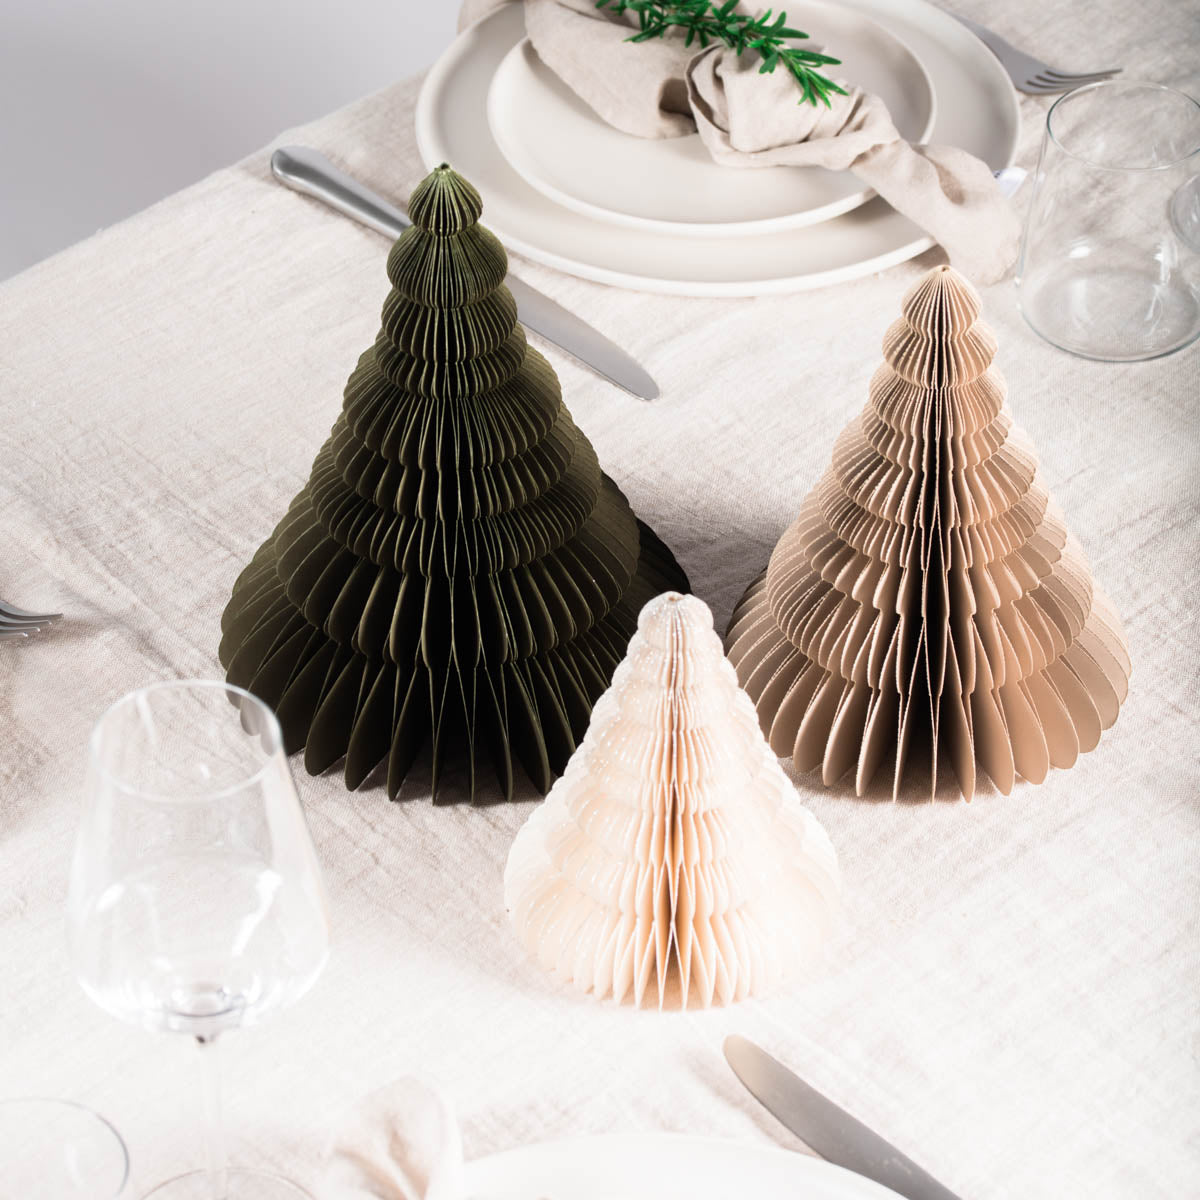 1 Off-White, 1 Olive Green and 1 Linen coloured Paper Standing Christmas Trees, in front of a white painted wall and resting on a table laid with white linen with glassware and rosemary sprigs viewed from above